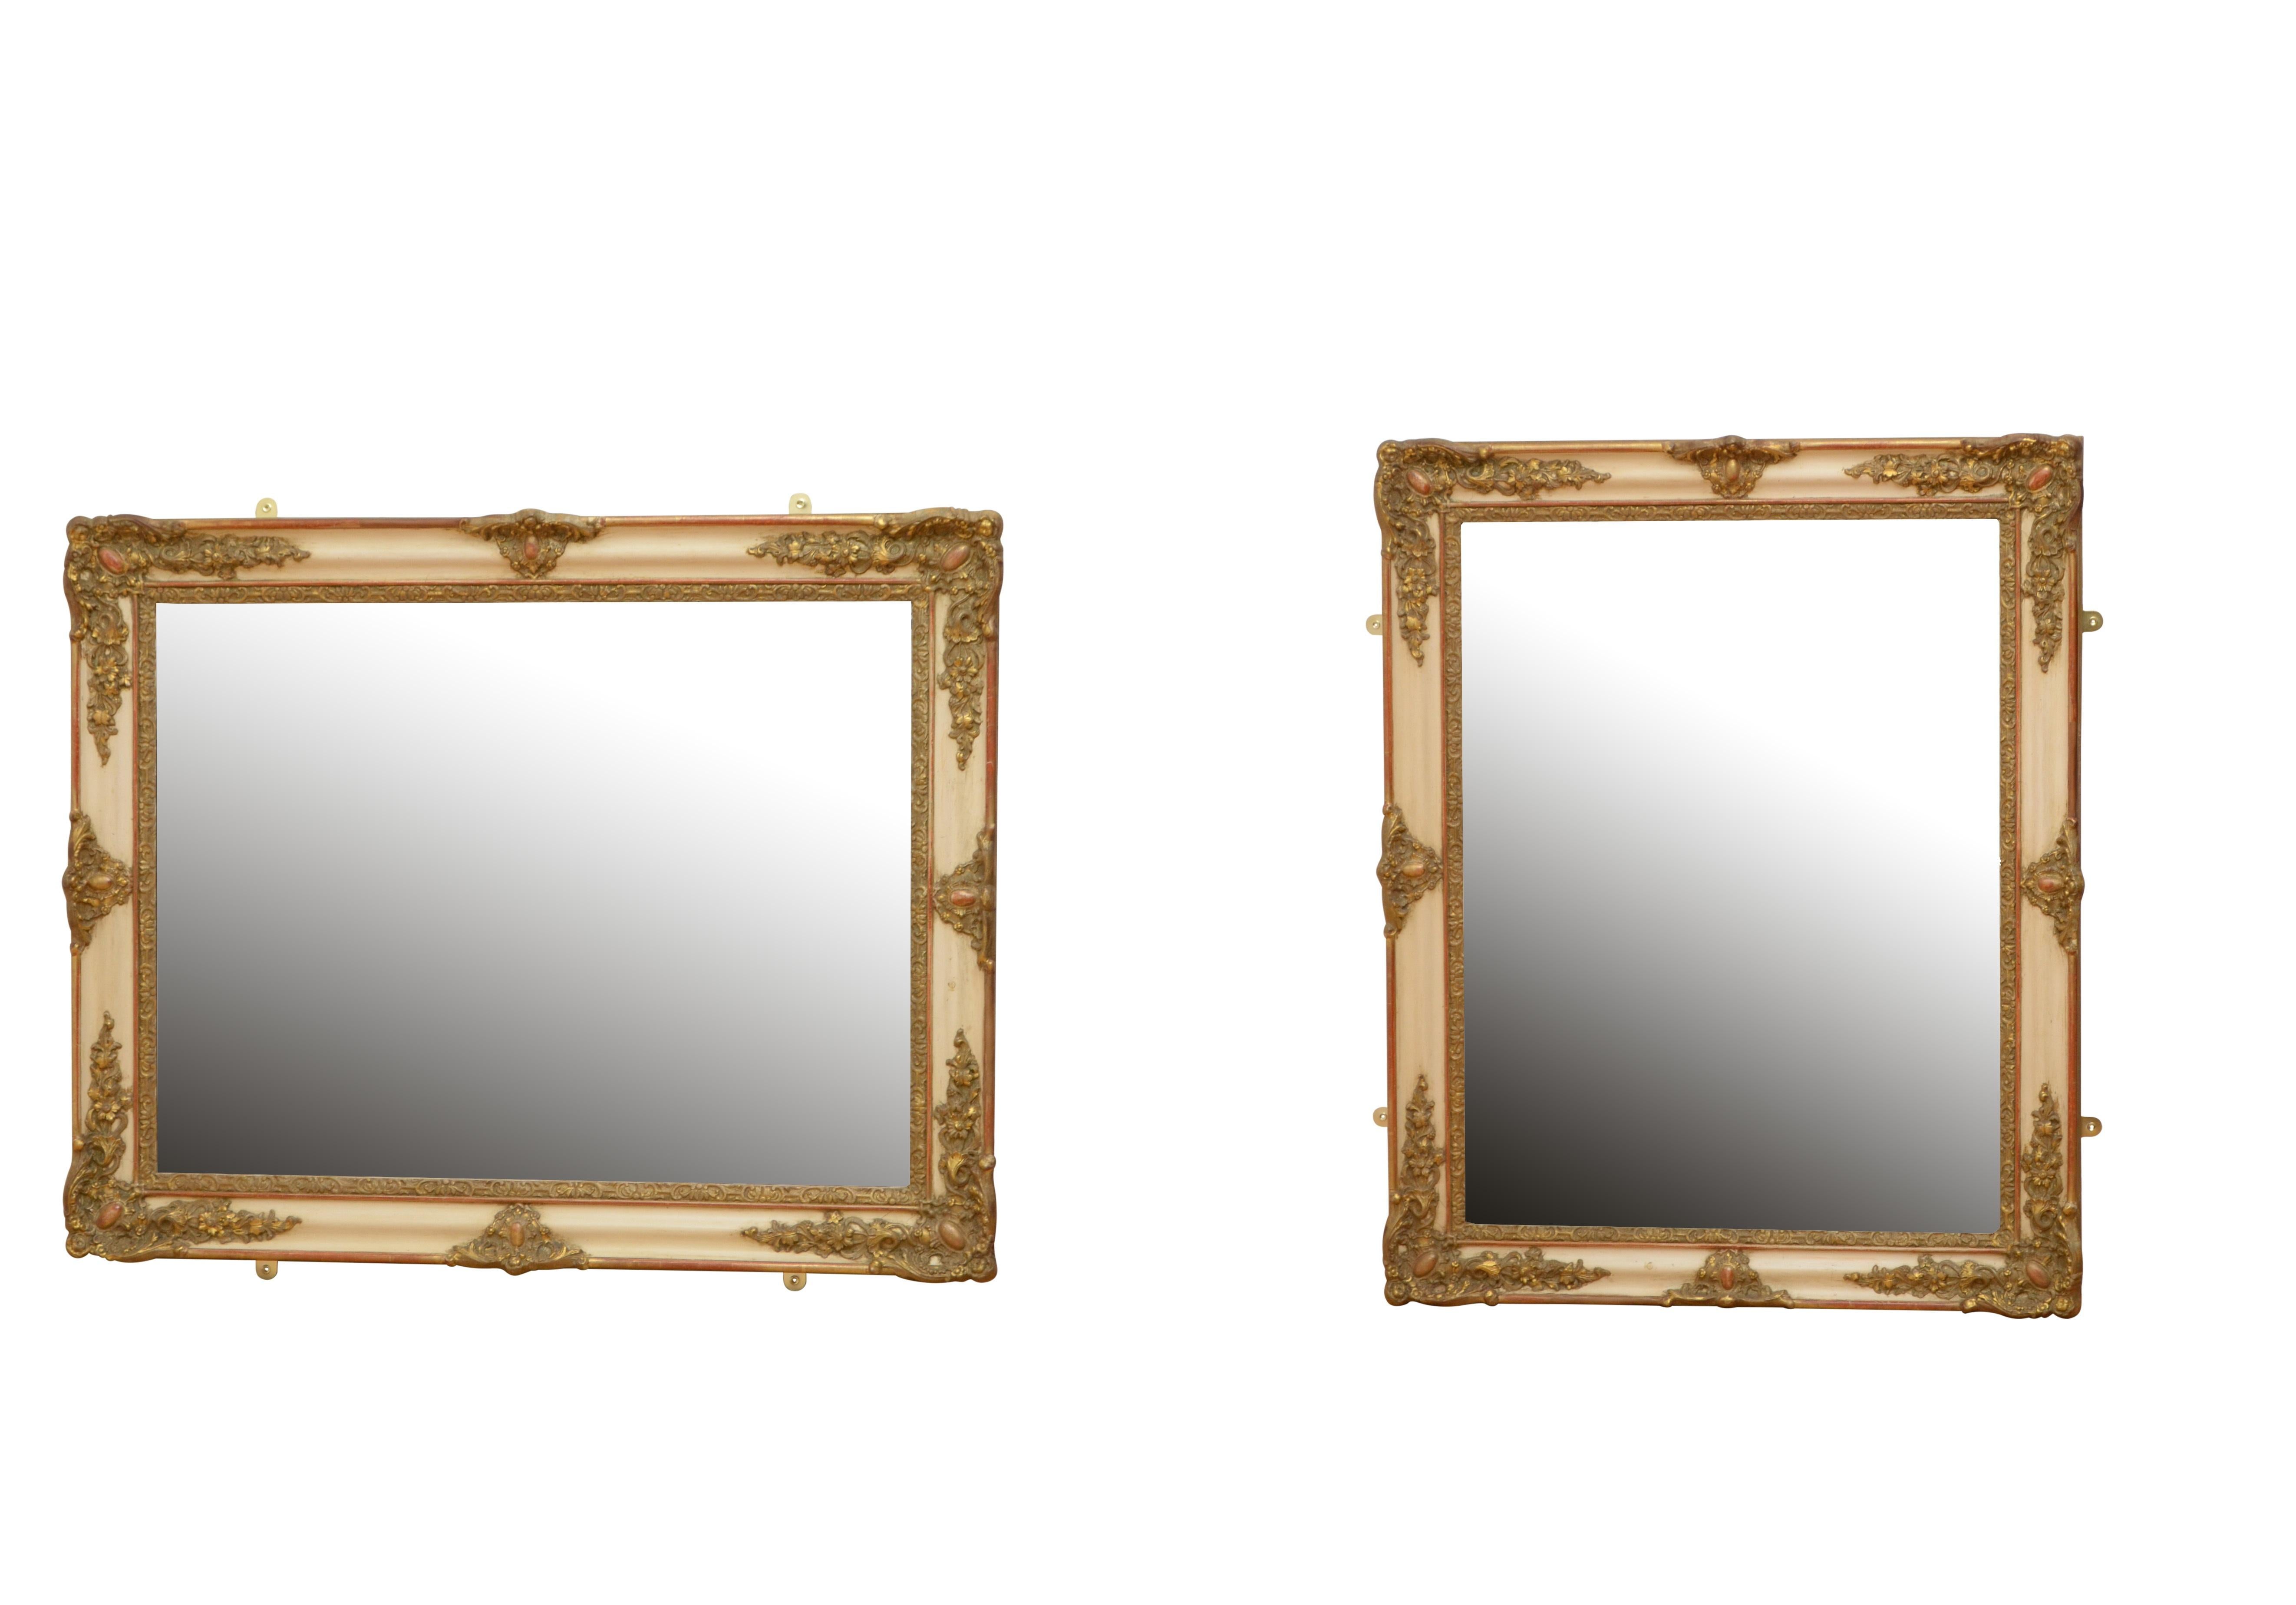 K0461 19th century wall mirror of versatile form could be positioned portrait or landscape, having original mirror plate with superb foxing in beautifully carved and gilded frame. This antique gilt mirror retains is ready to place at home, circa